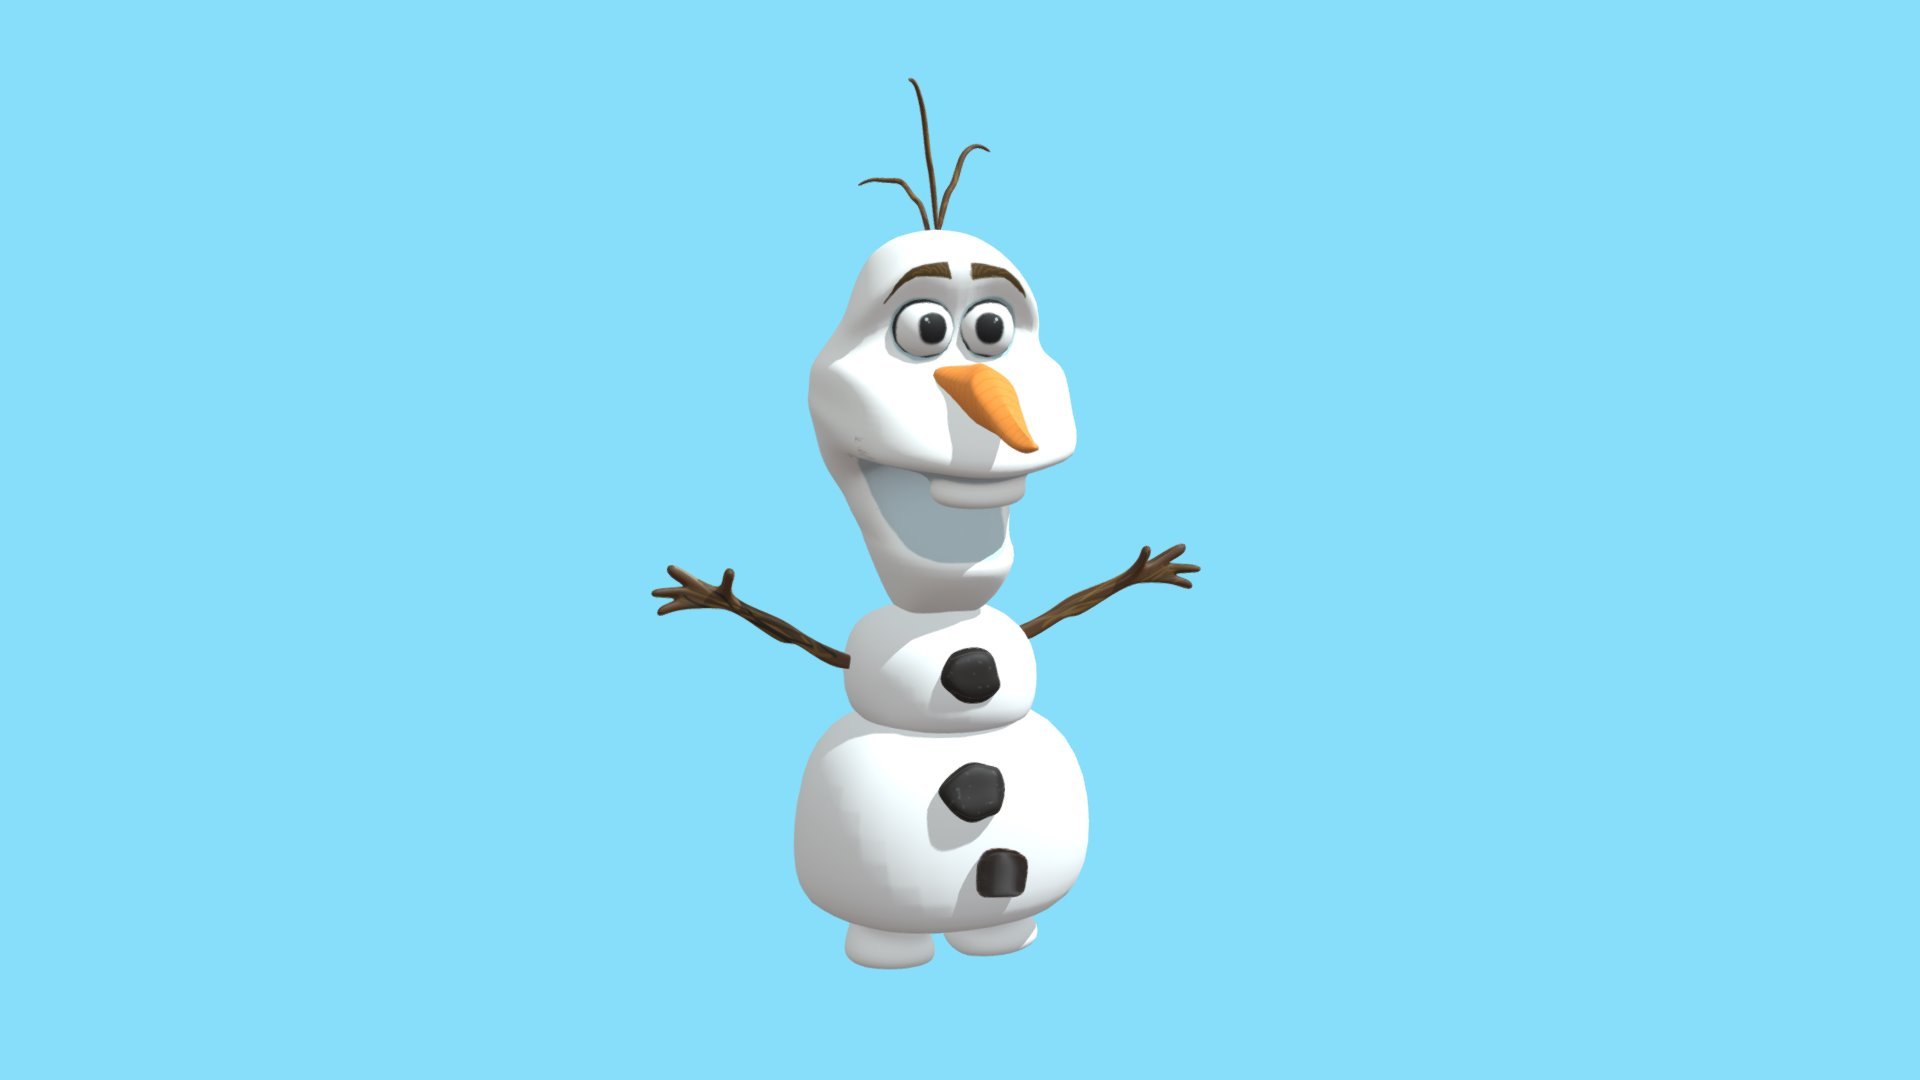 3D model of Olaf from Frozen, hand painted - Olaf 3D model - 3D model by ch...